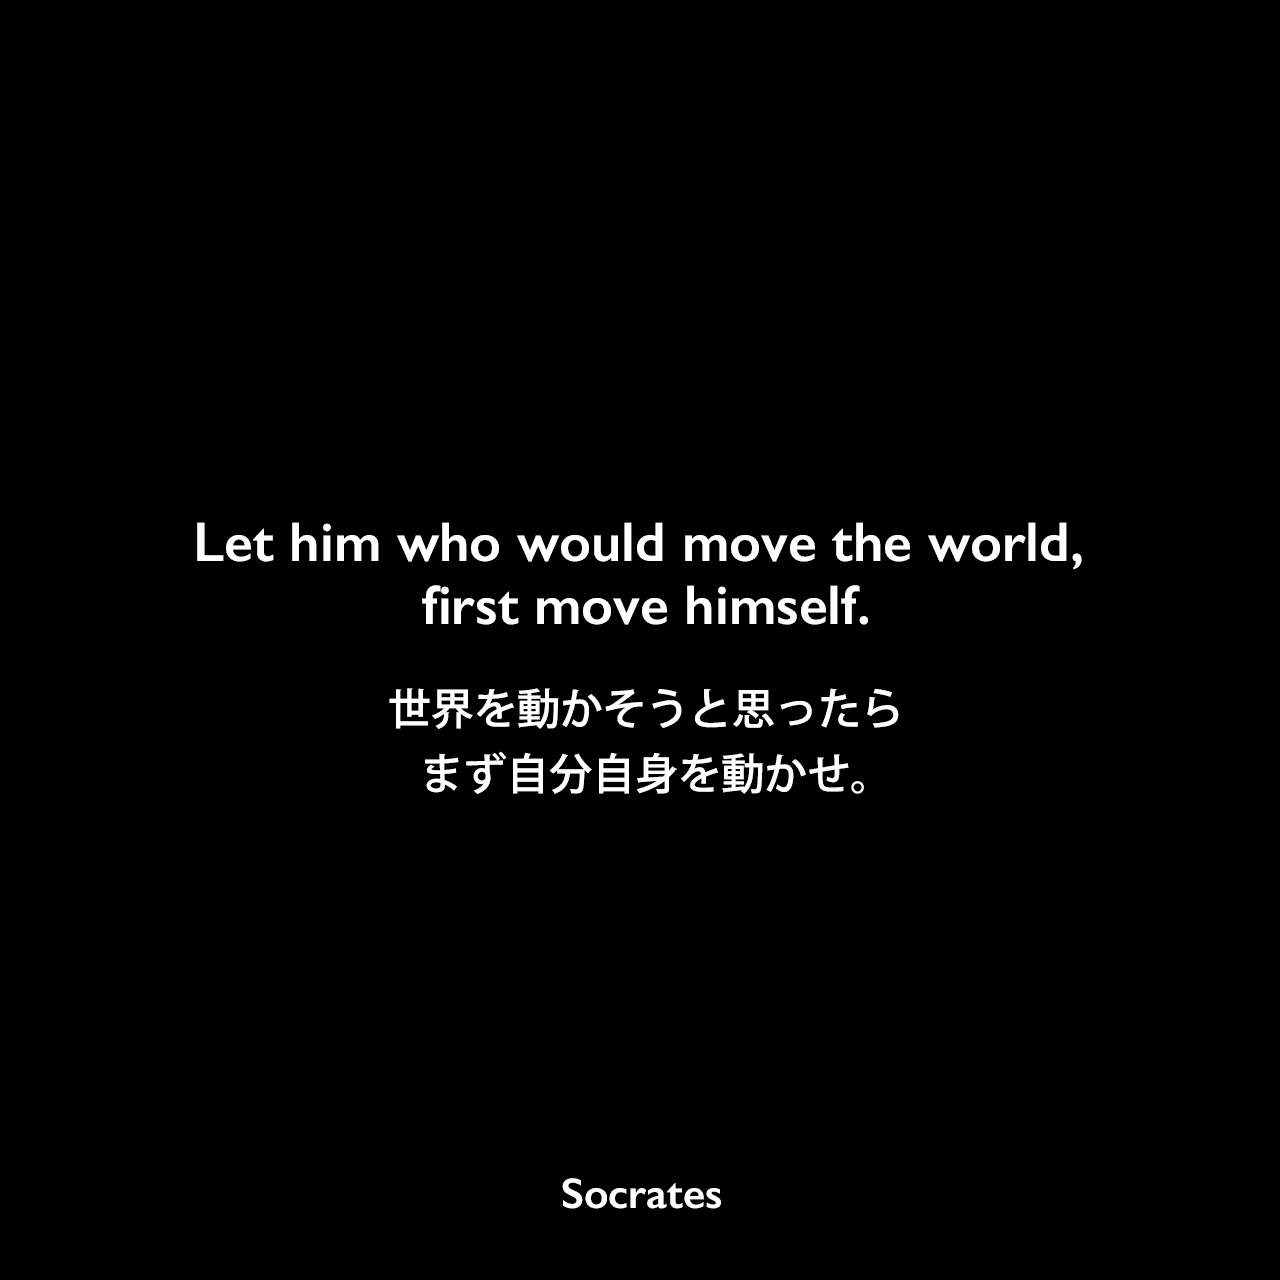 Let him who would move the world, first move himself.世界を動かそうと思ったら、まず自分自身を動かせ。Socrates